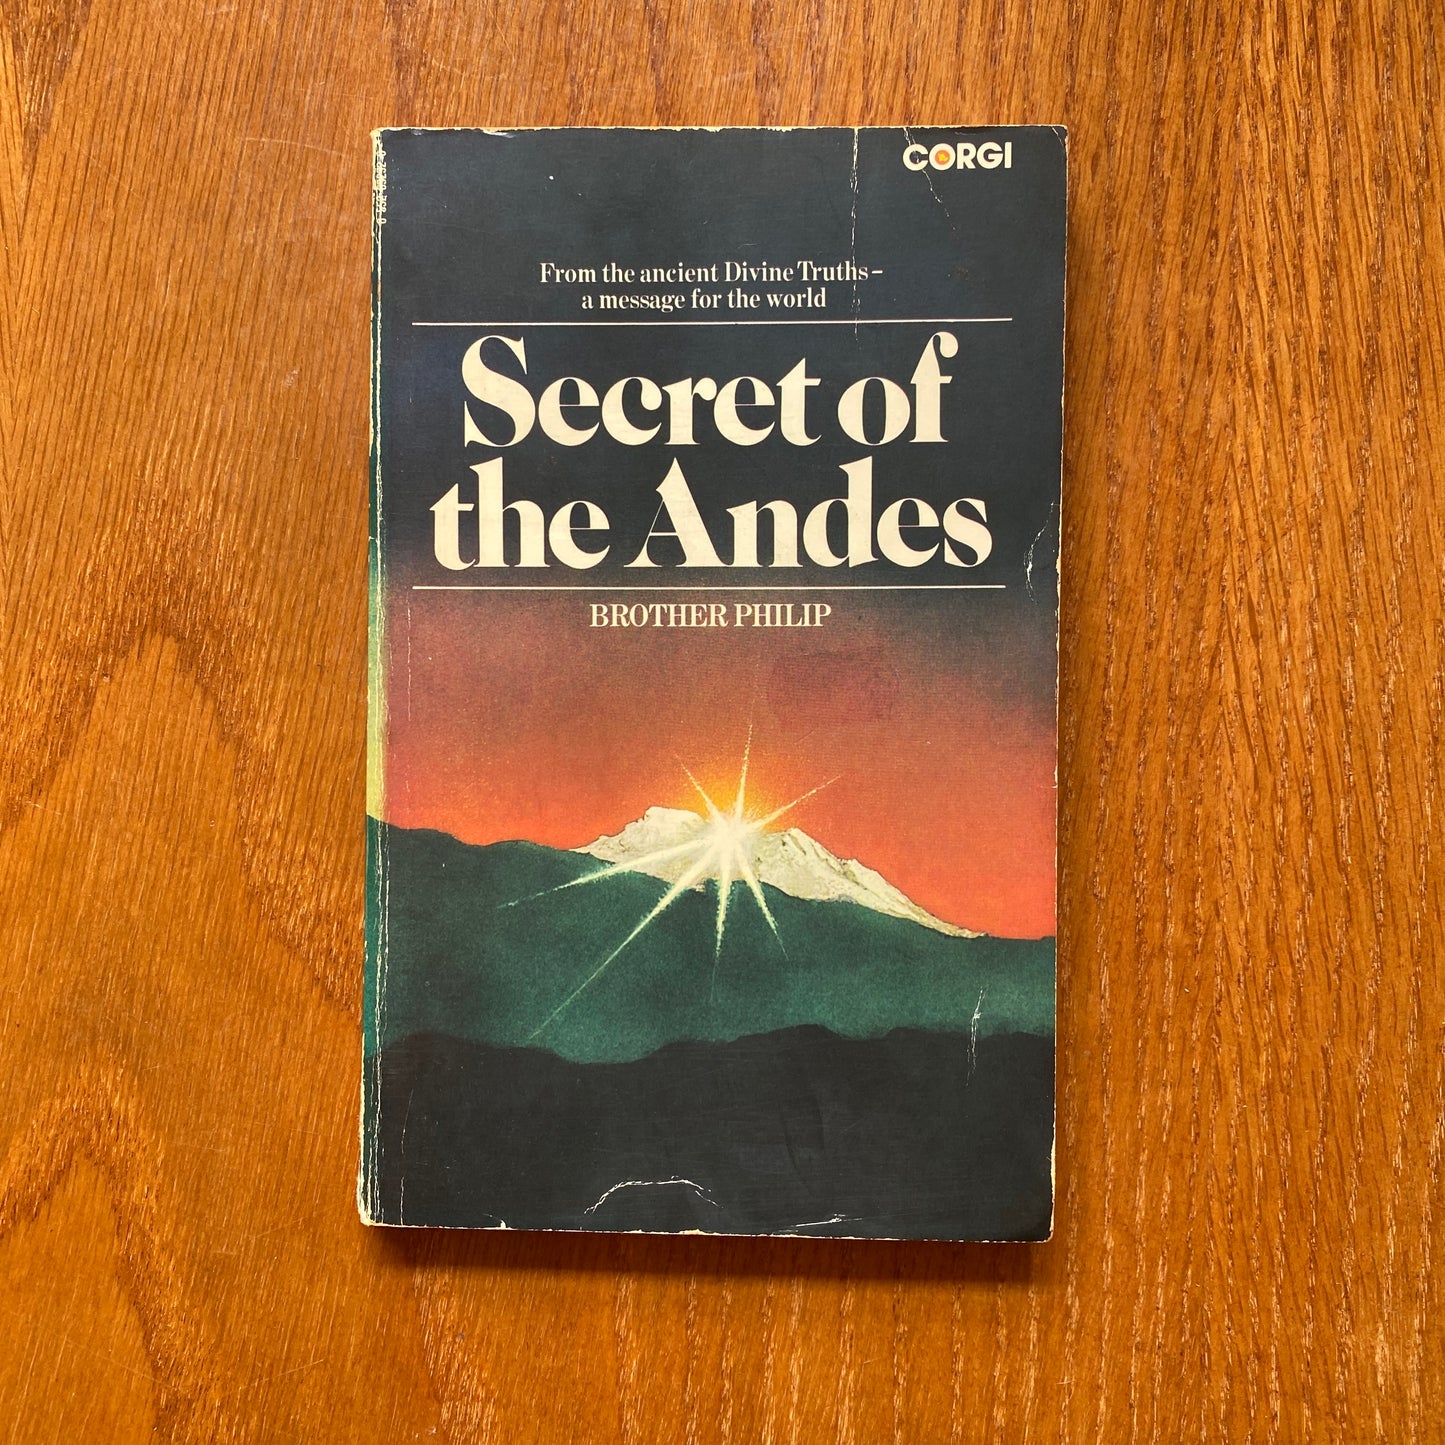 The Secret of the Andes - Brother Phillip